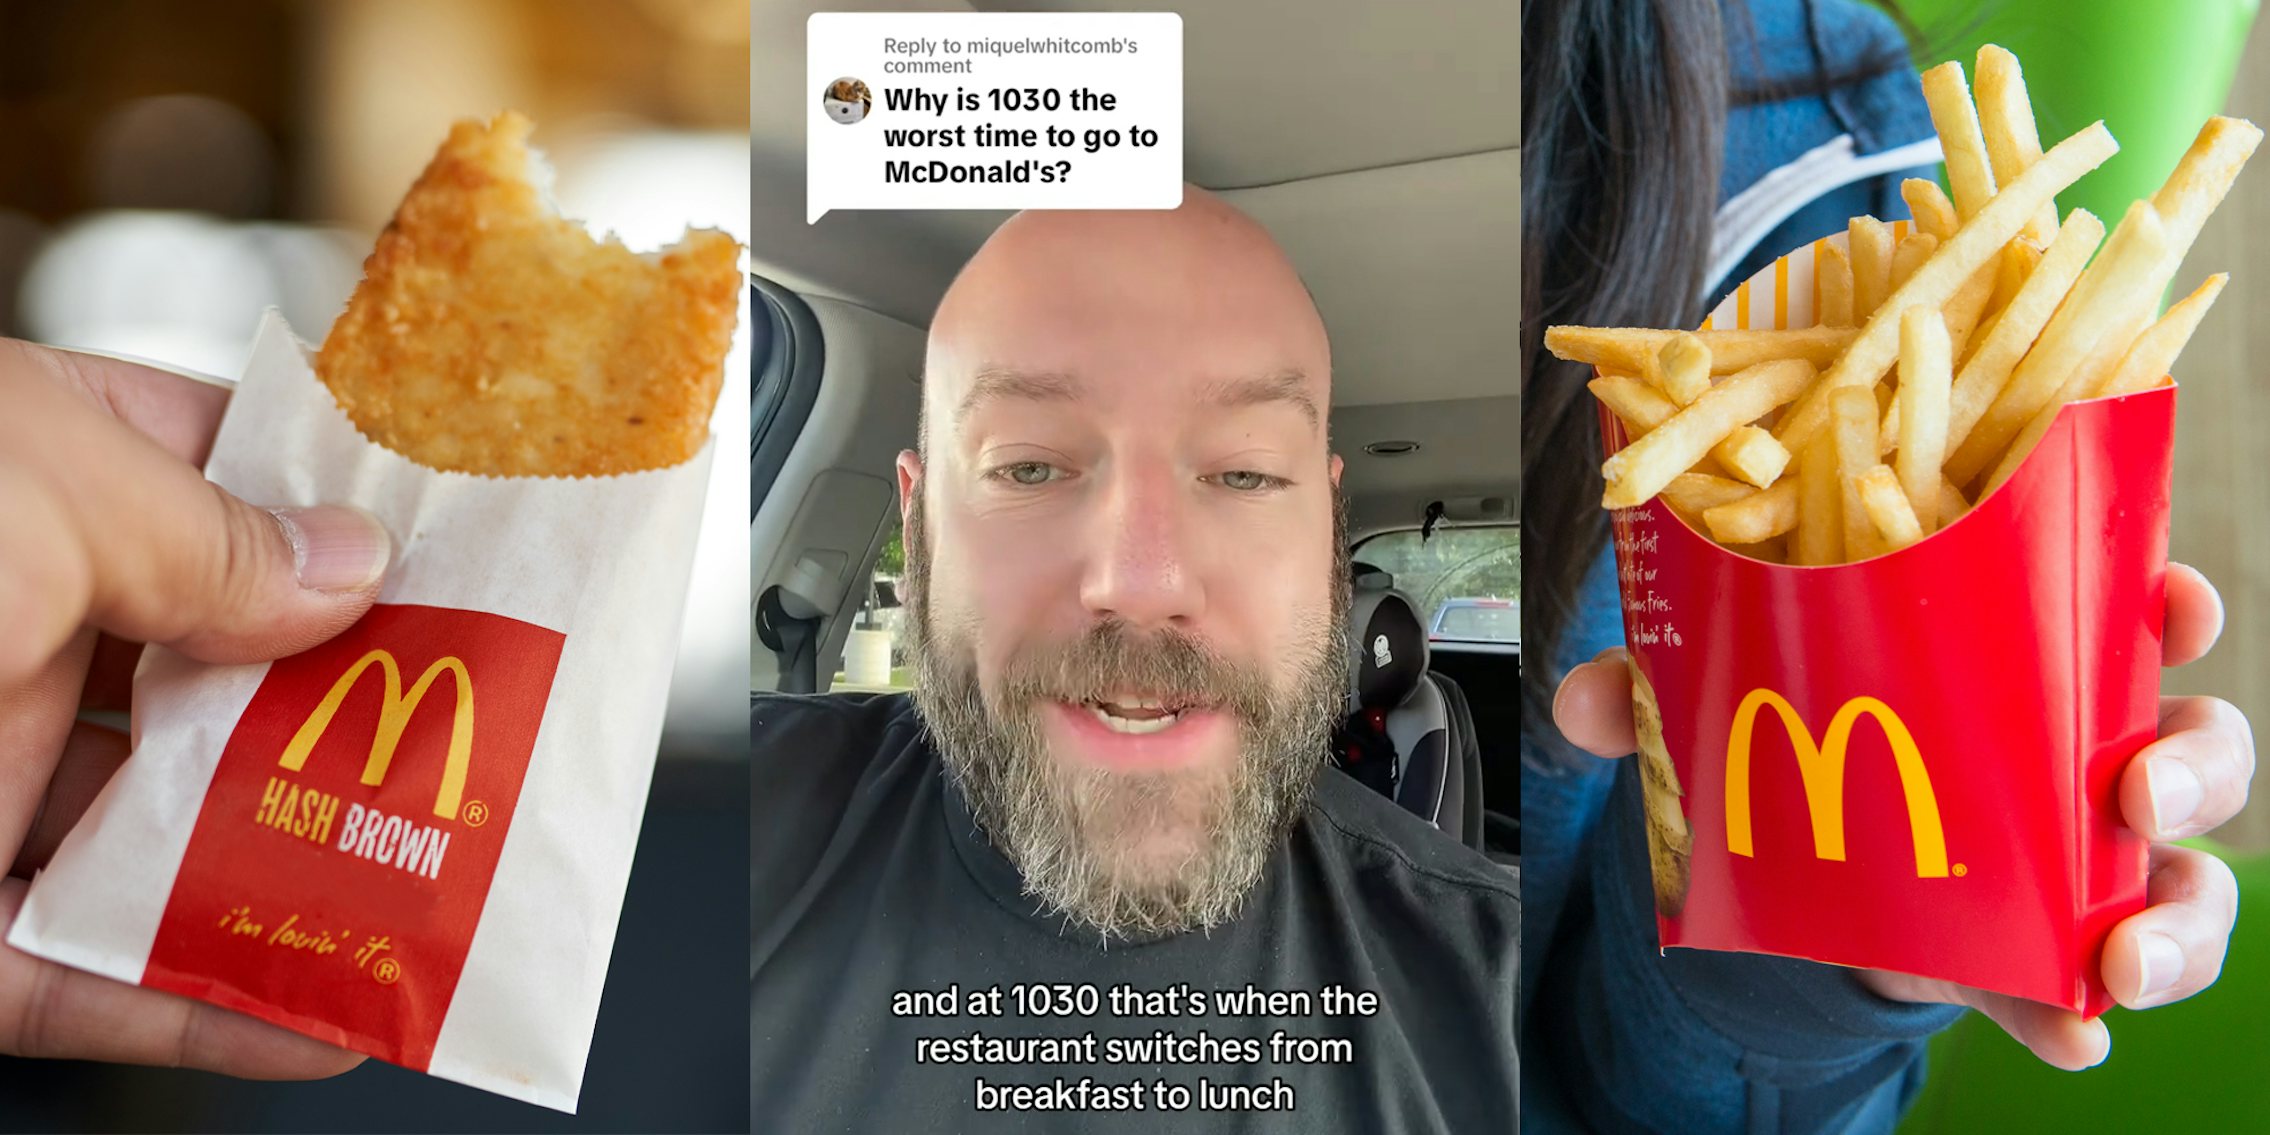 hand holding McDonald's hashbrown (l) former McDonald's corporate chef speaking in car with caption 'Why is 1030 the worst time to go to McDonald's? and at 1030 that's when the restaurant switches from breakfast to lunch' (c) hand holding McDonald's french fries (r)